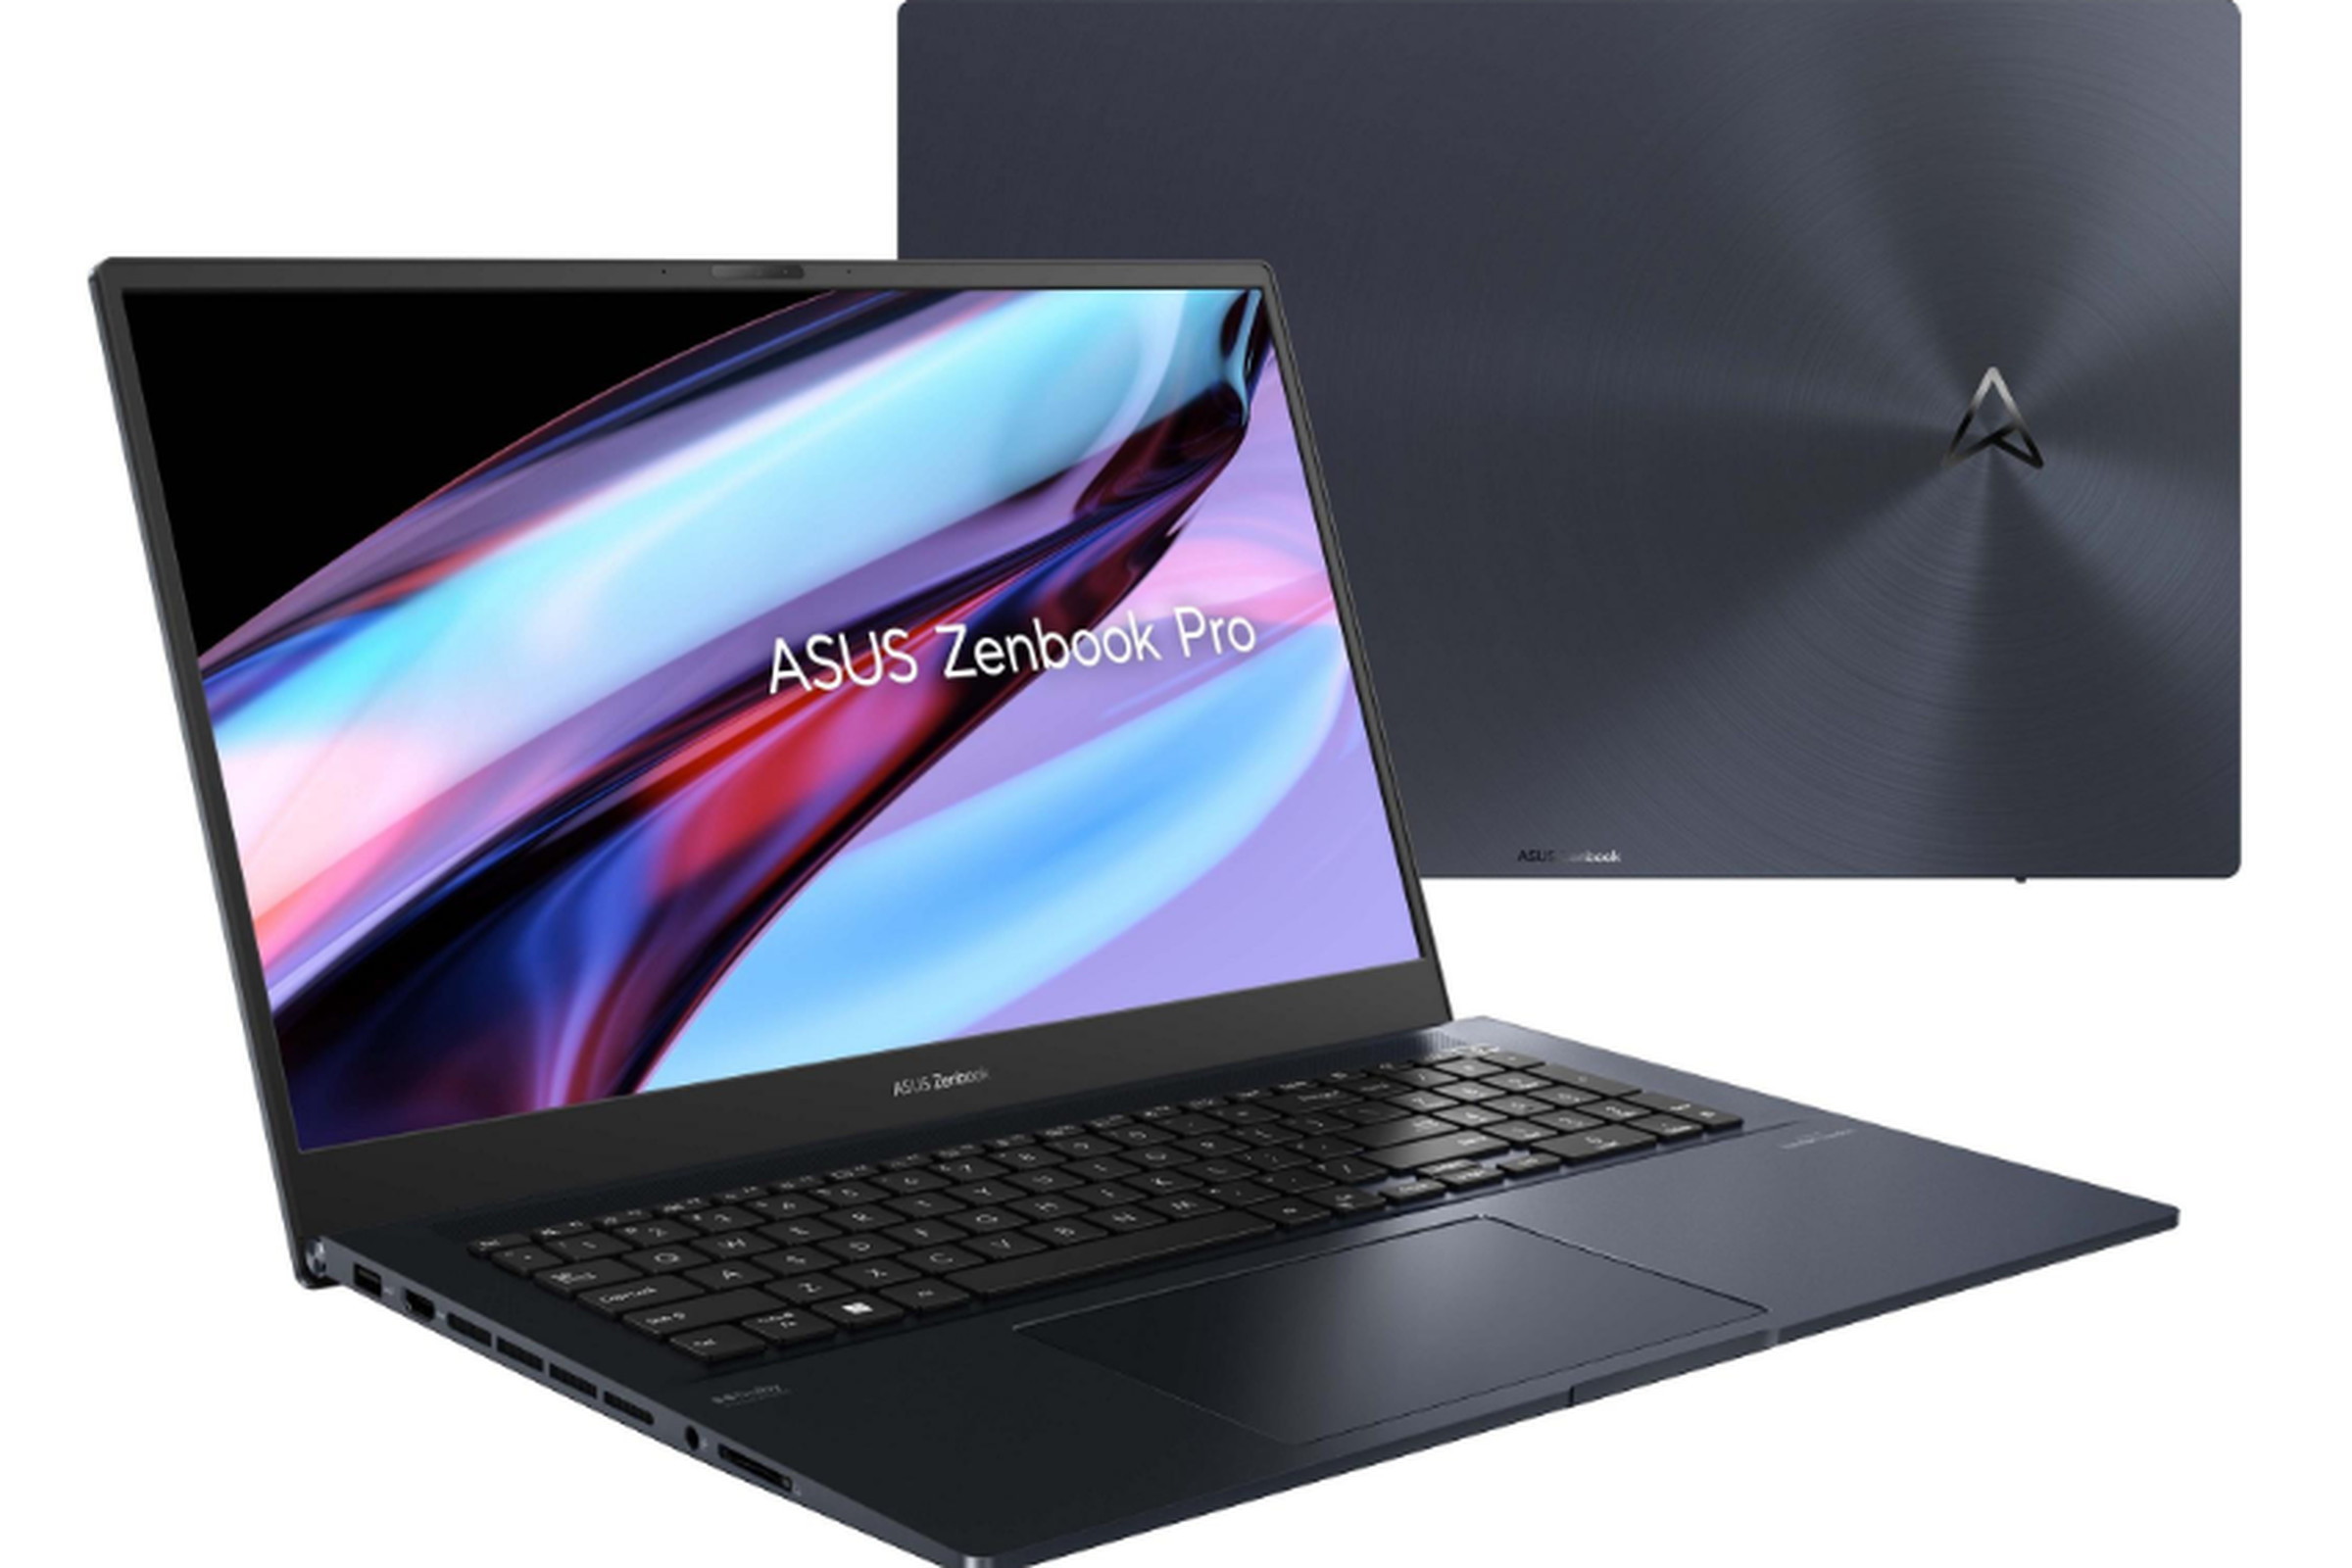 Two Asus Zenbook Pro 17 models on a white background, one open, one closed with the lid facing the camera.